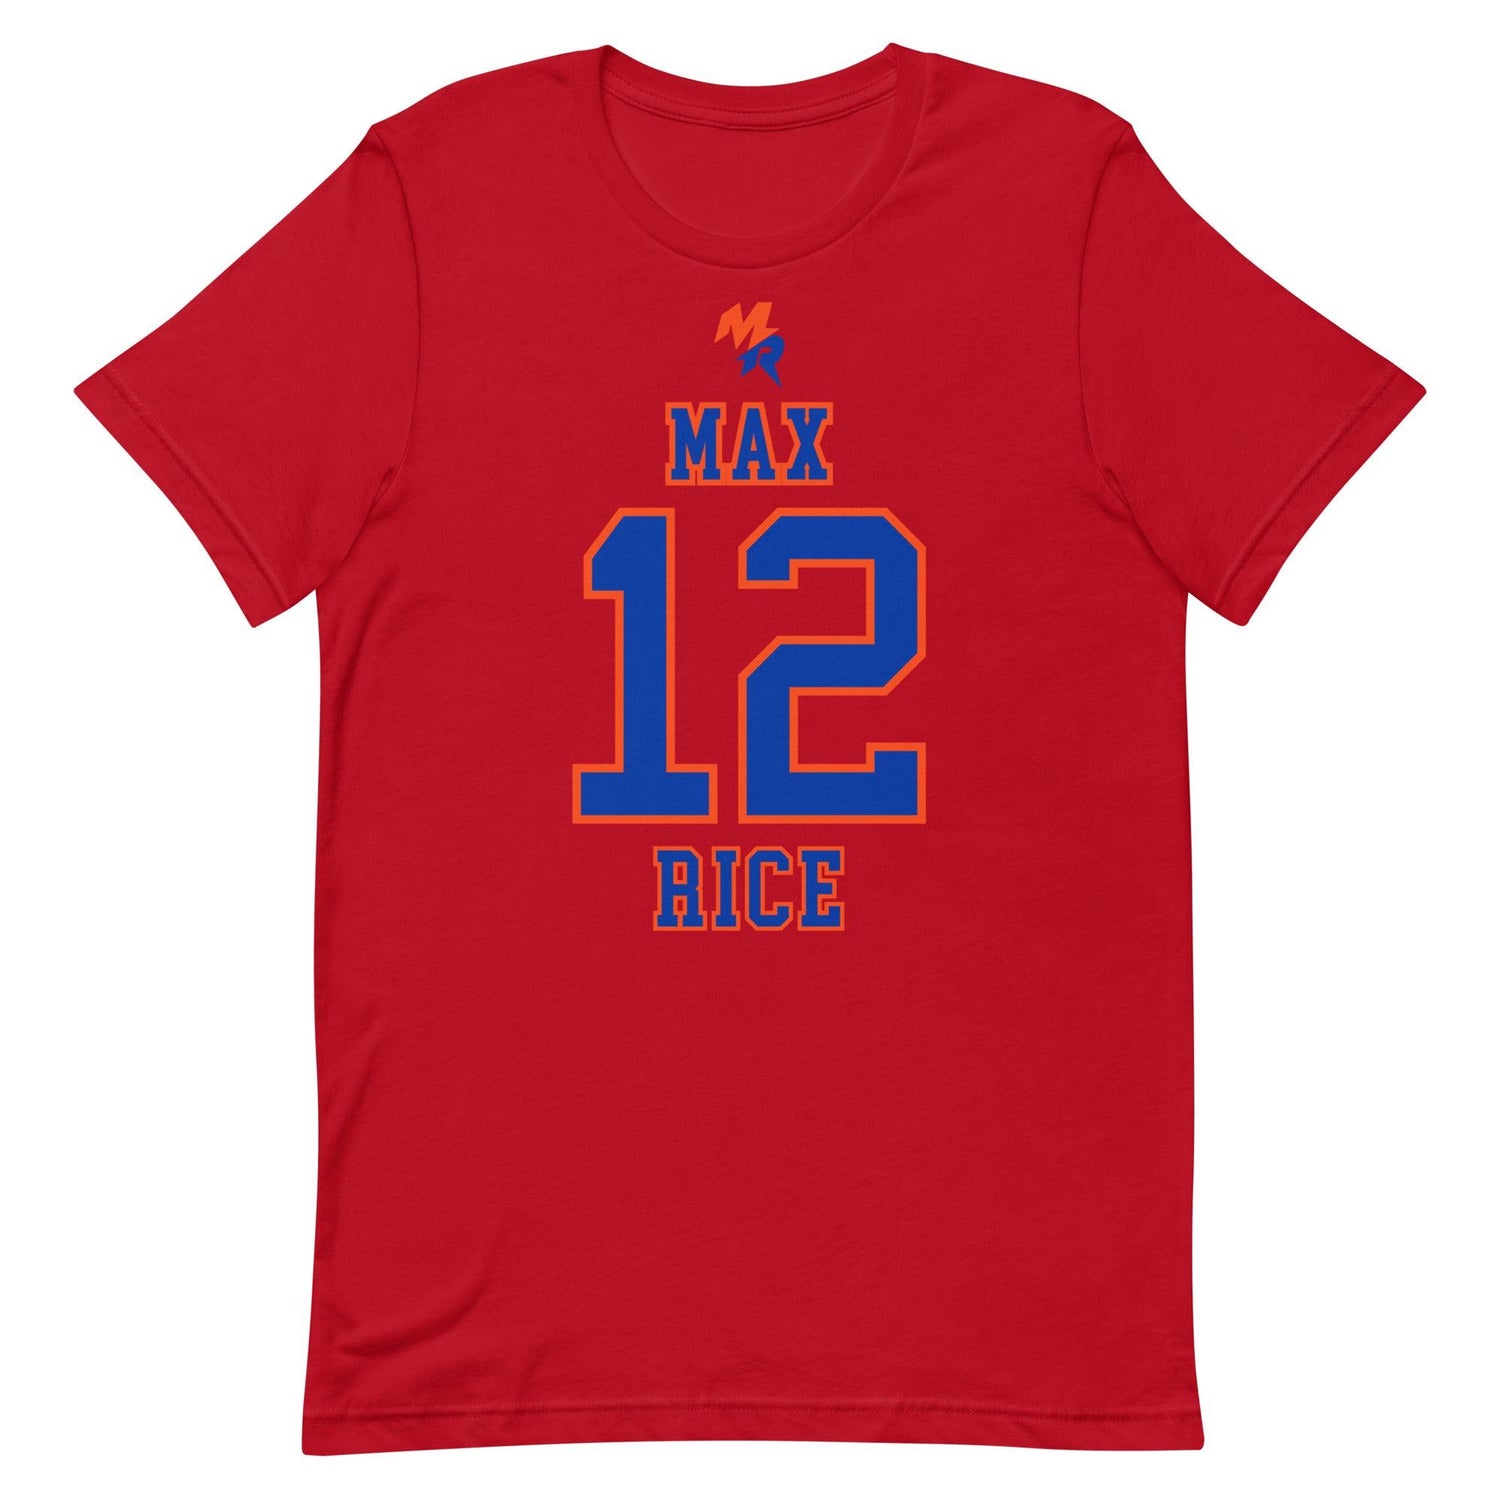 Max Rice "Jersey" t-shirt - Fan Arch